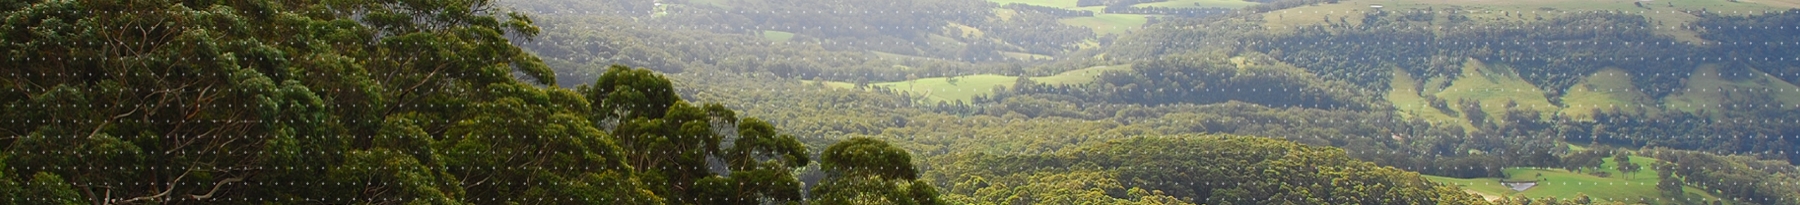 Photograph of pastures and hills